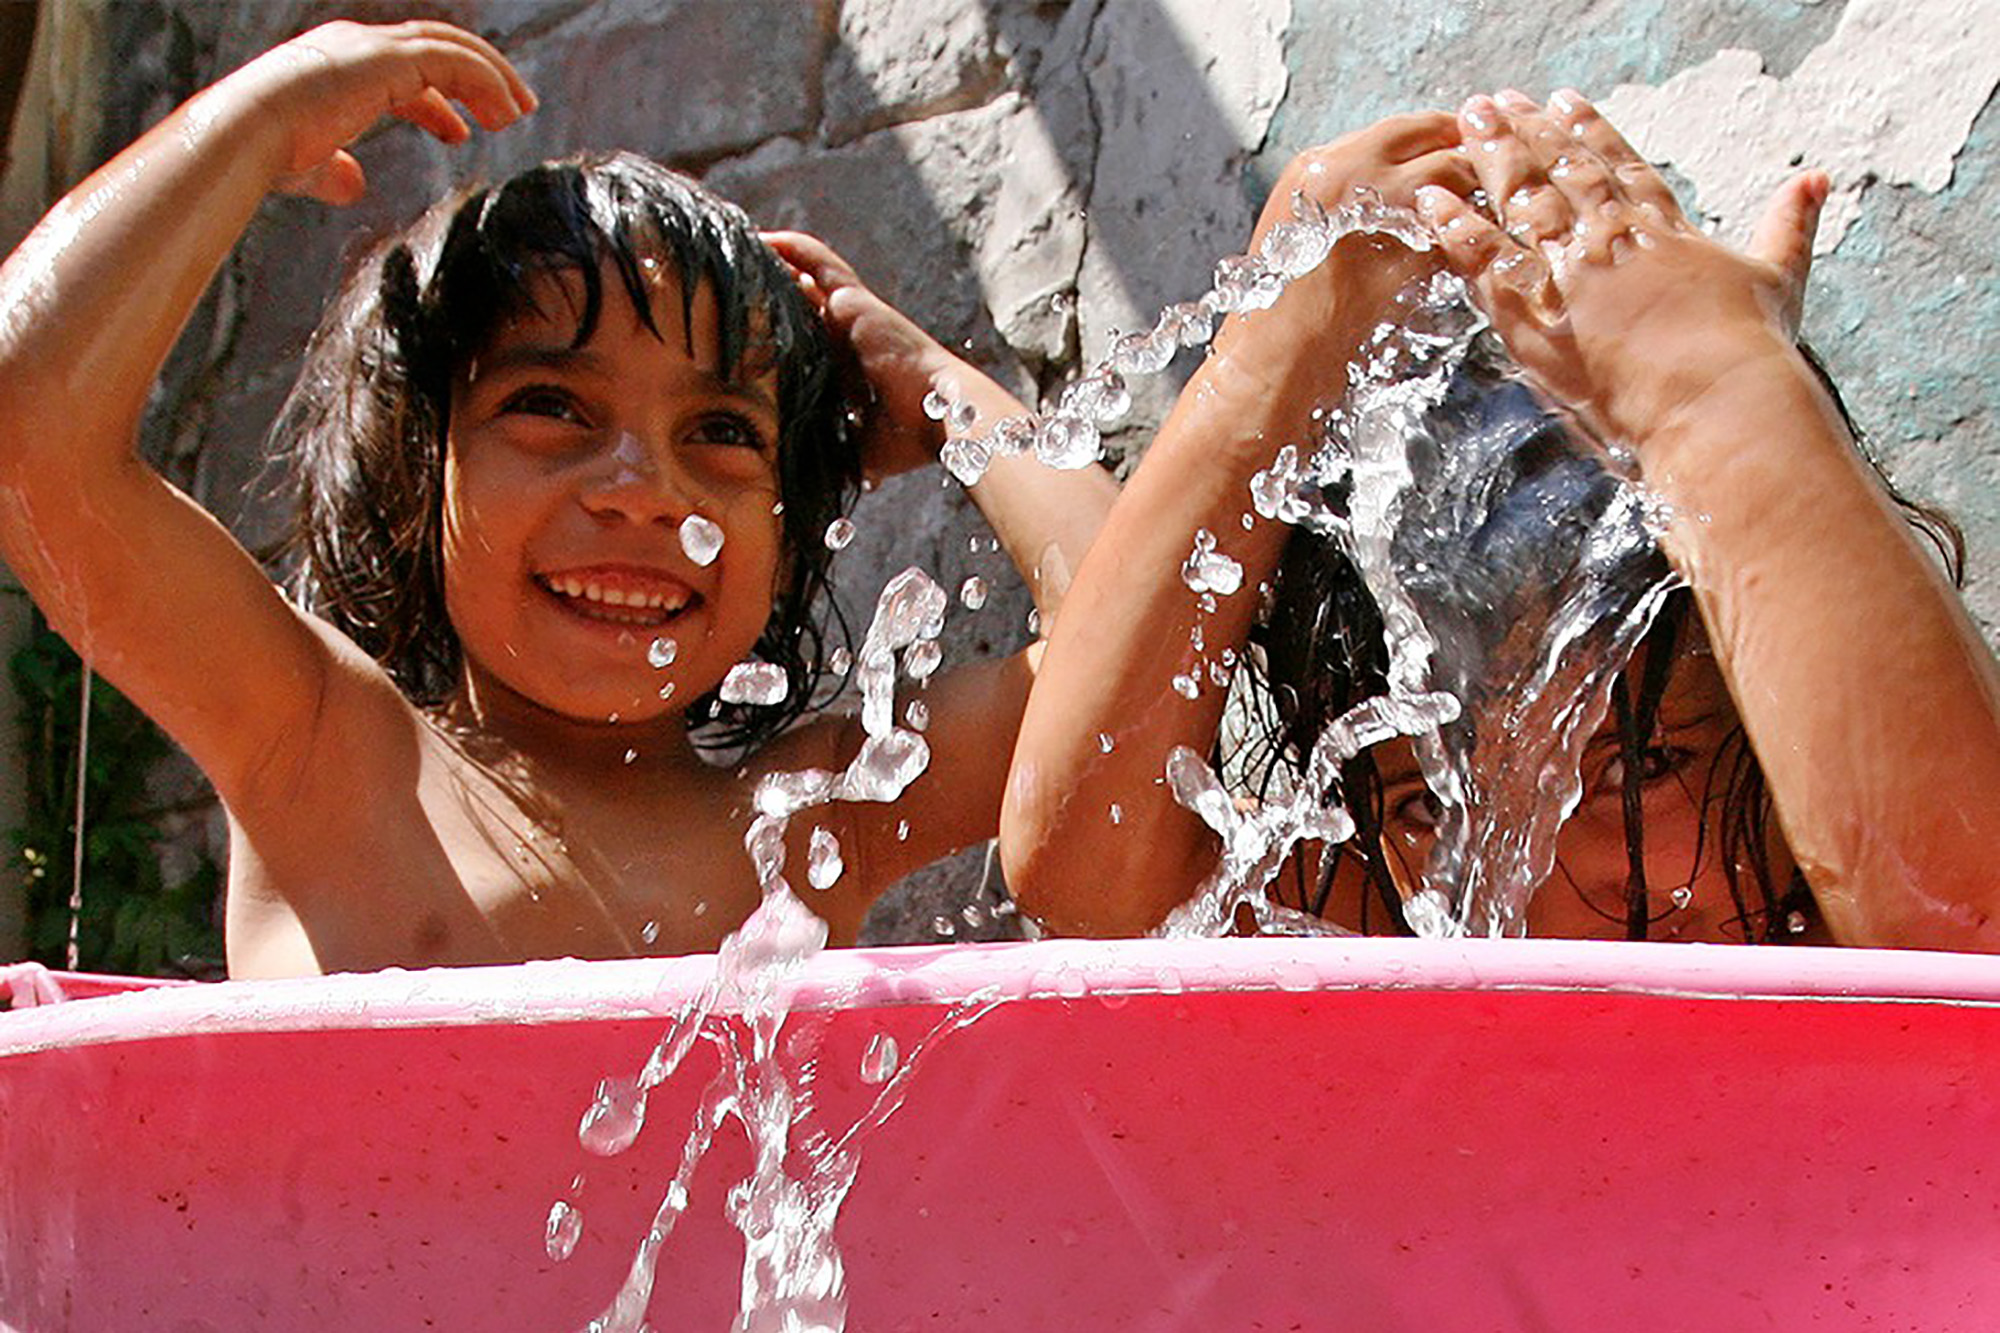 Two Roma children playing with water in a small basin.